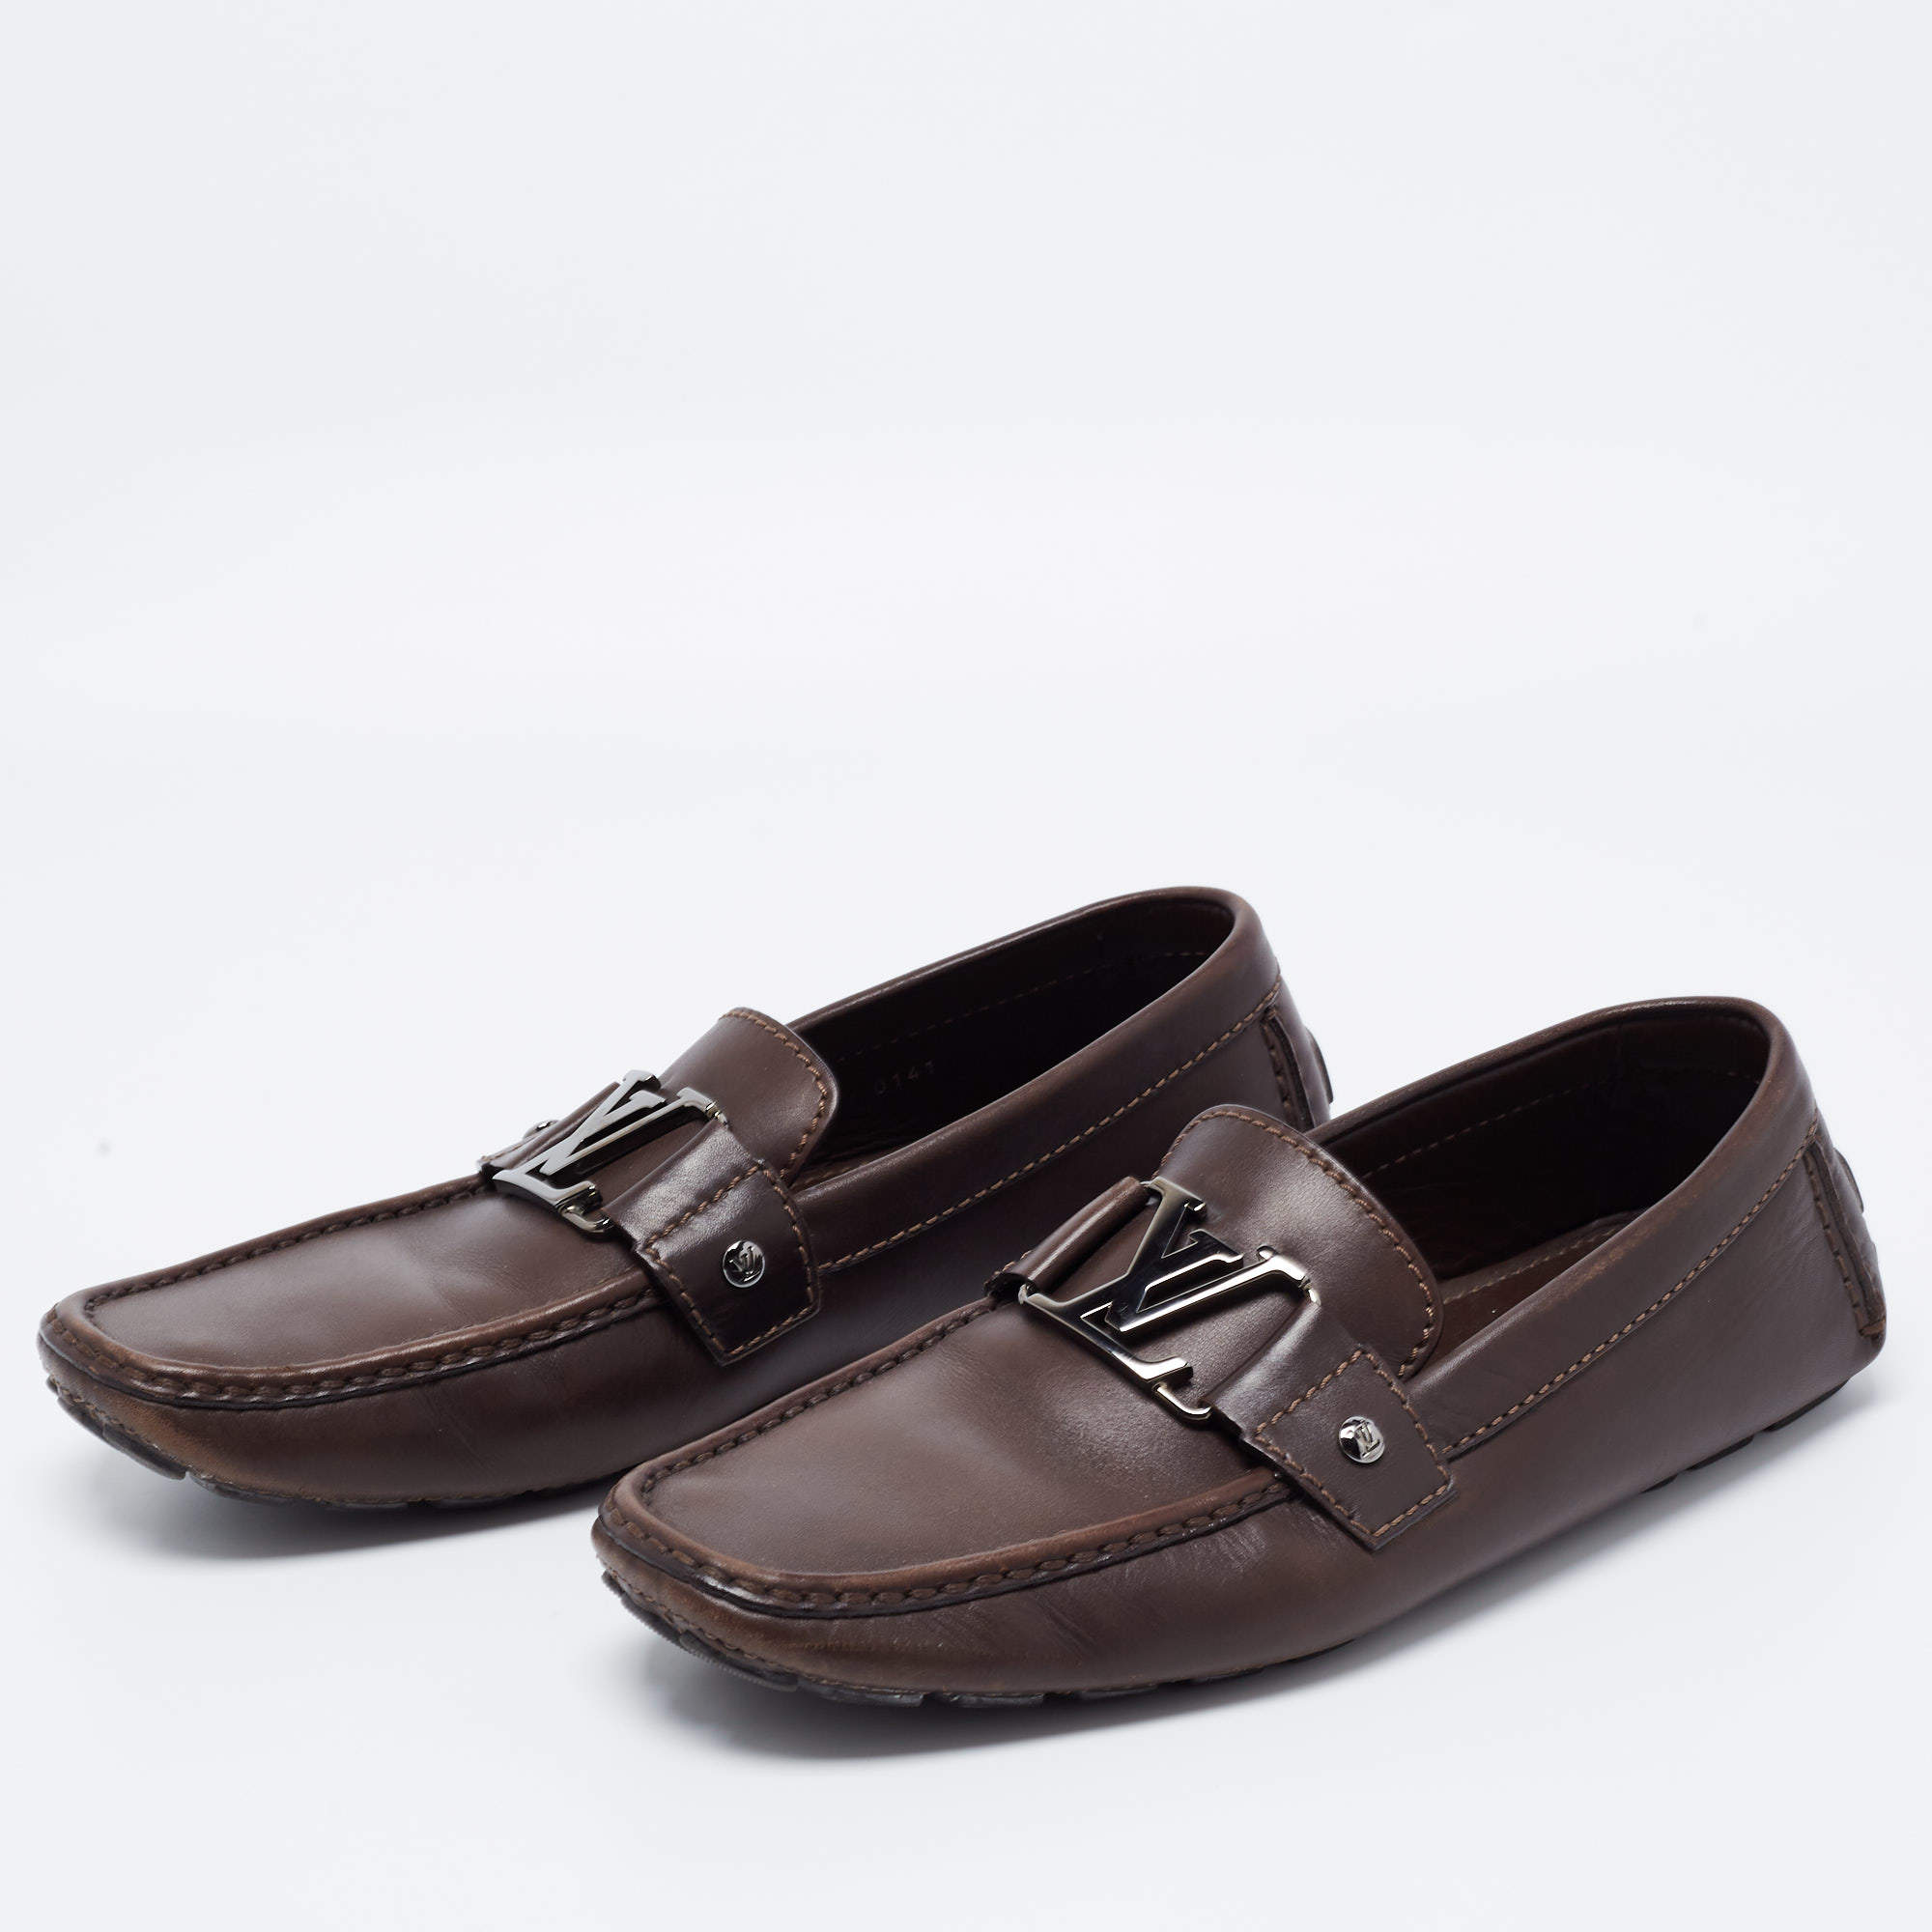 Louis Vuitton Brown Leather Slip on Loafers Size 41 Louis Vuitton